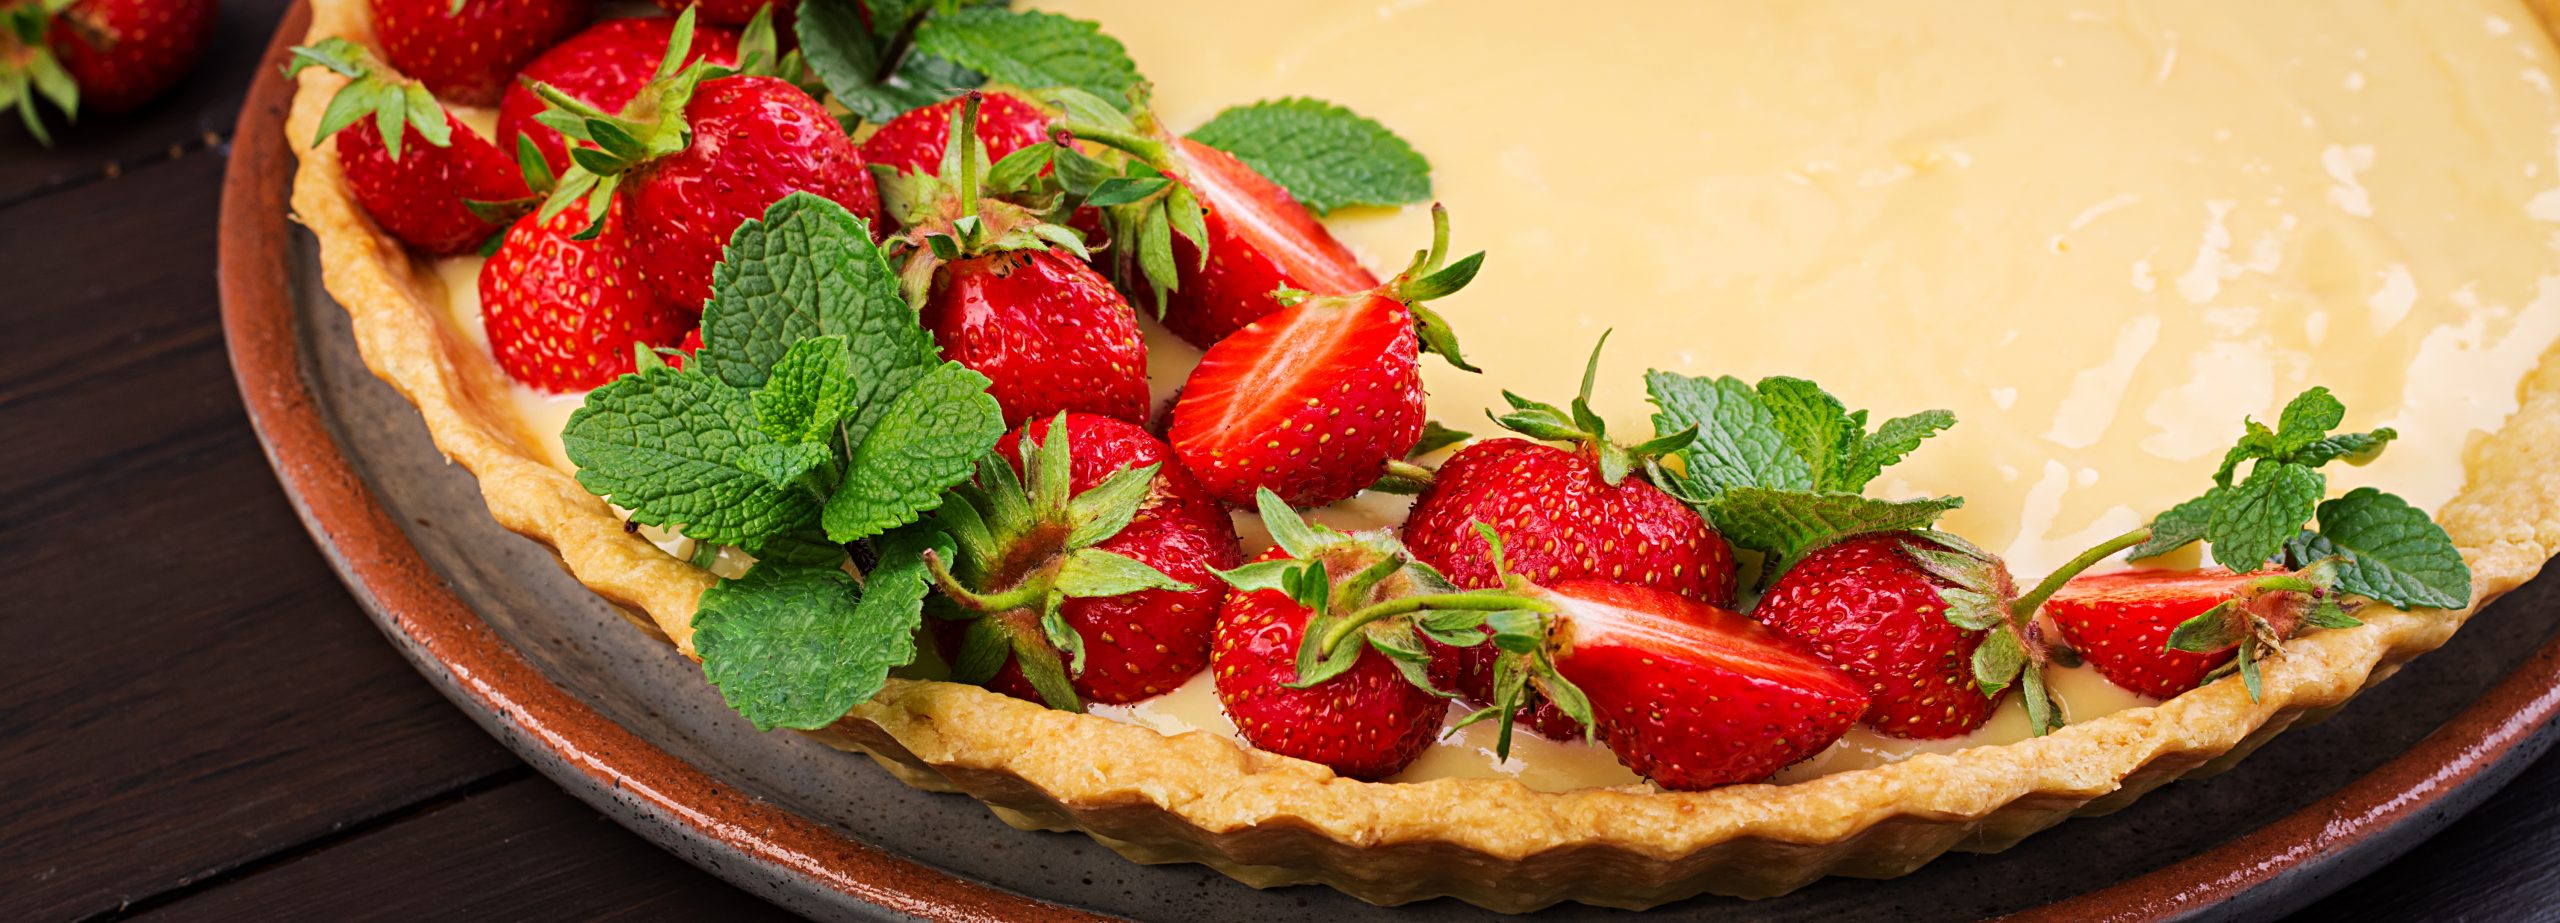 Tart with strawberries and whipped cream decorated with mint leaves on dark background. Banner